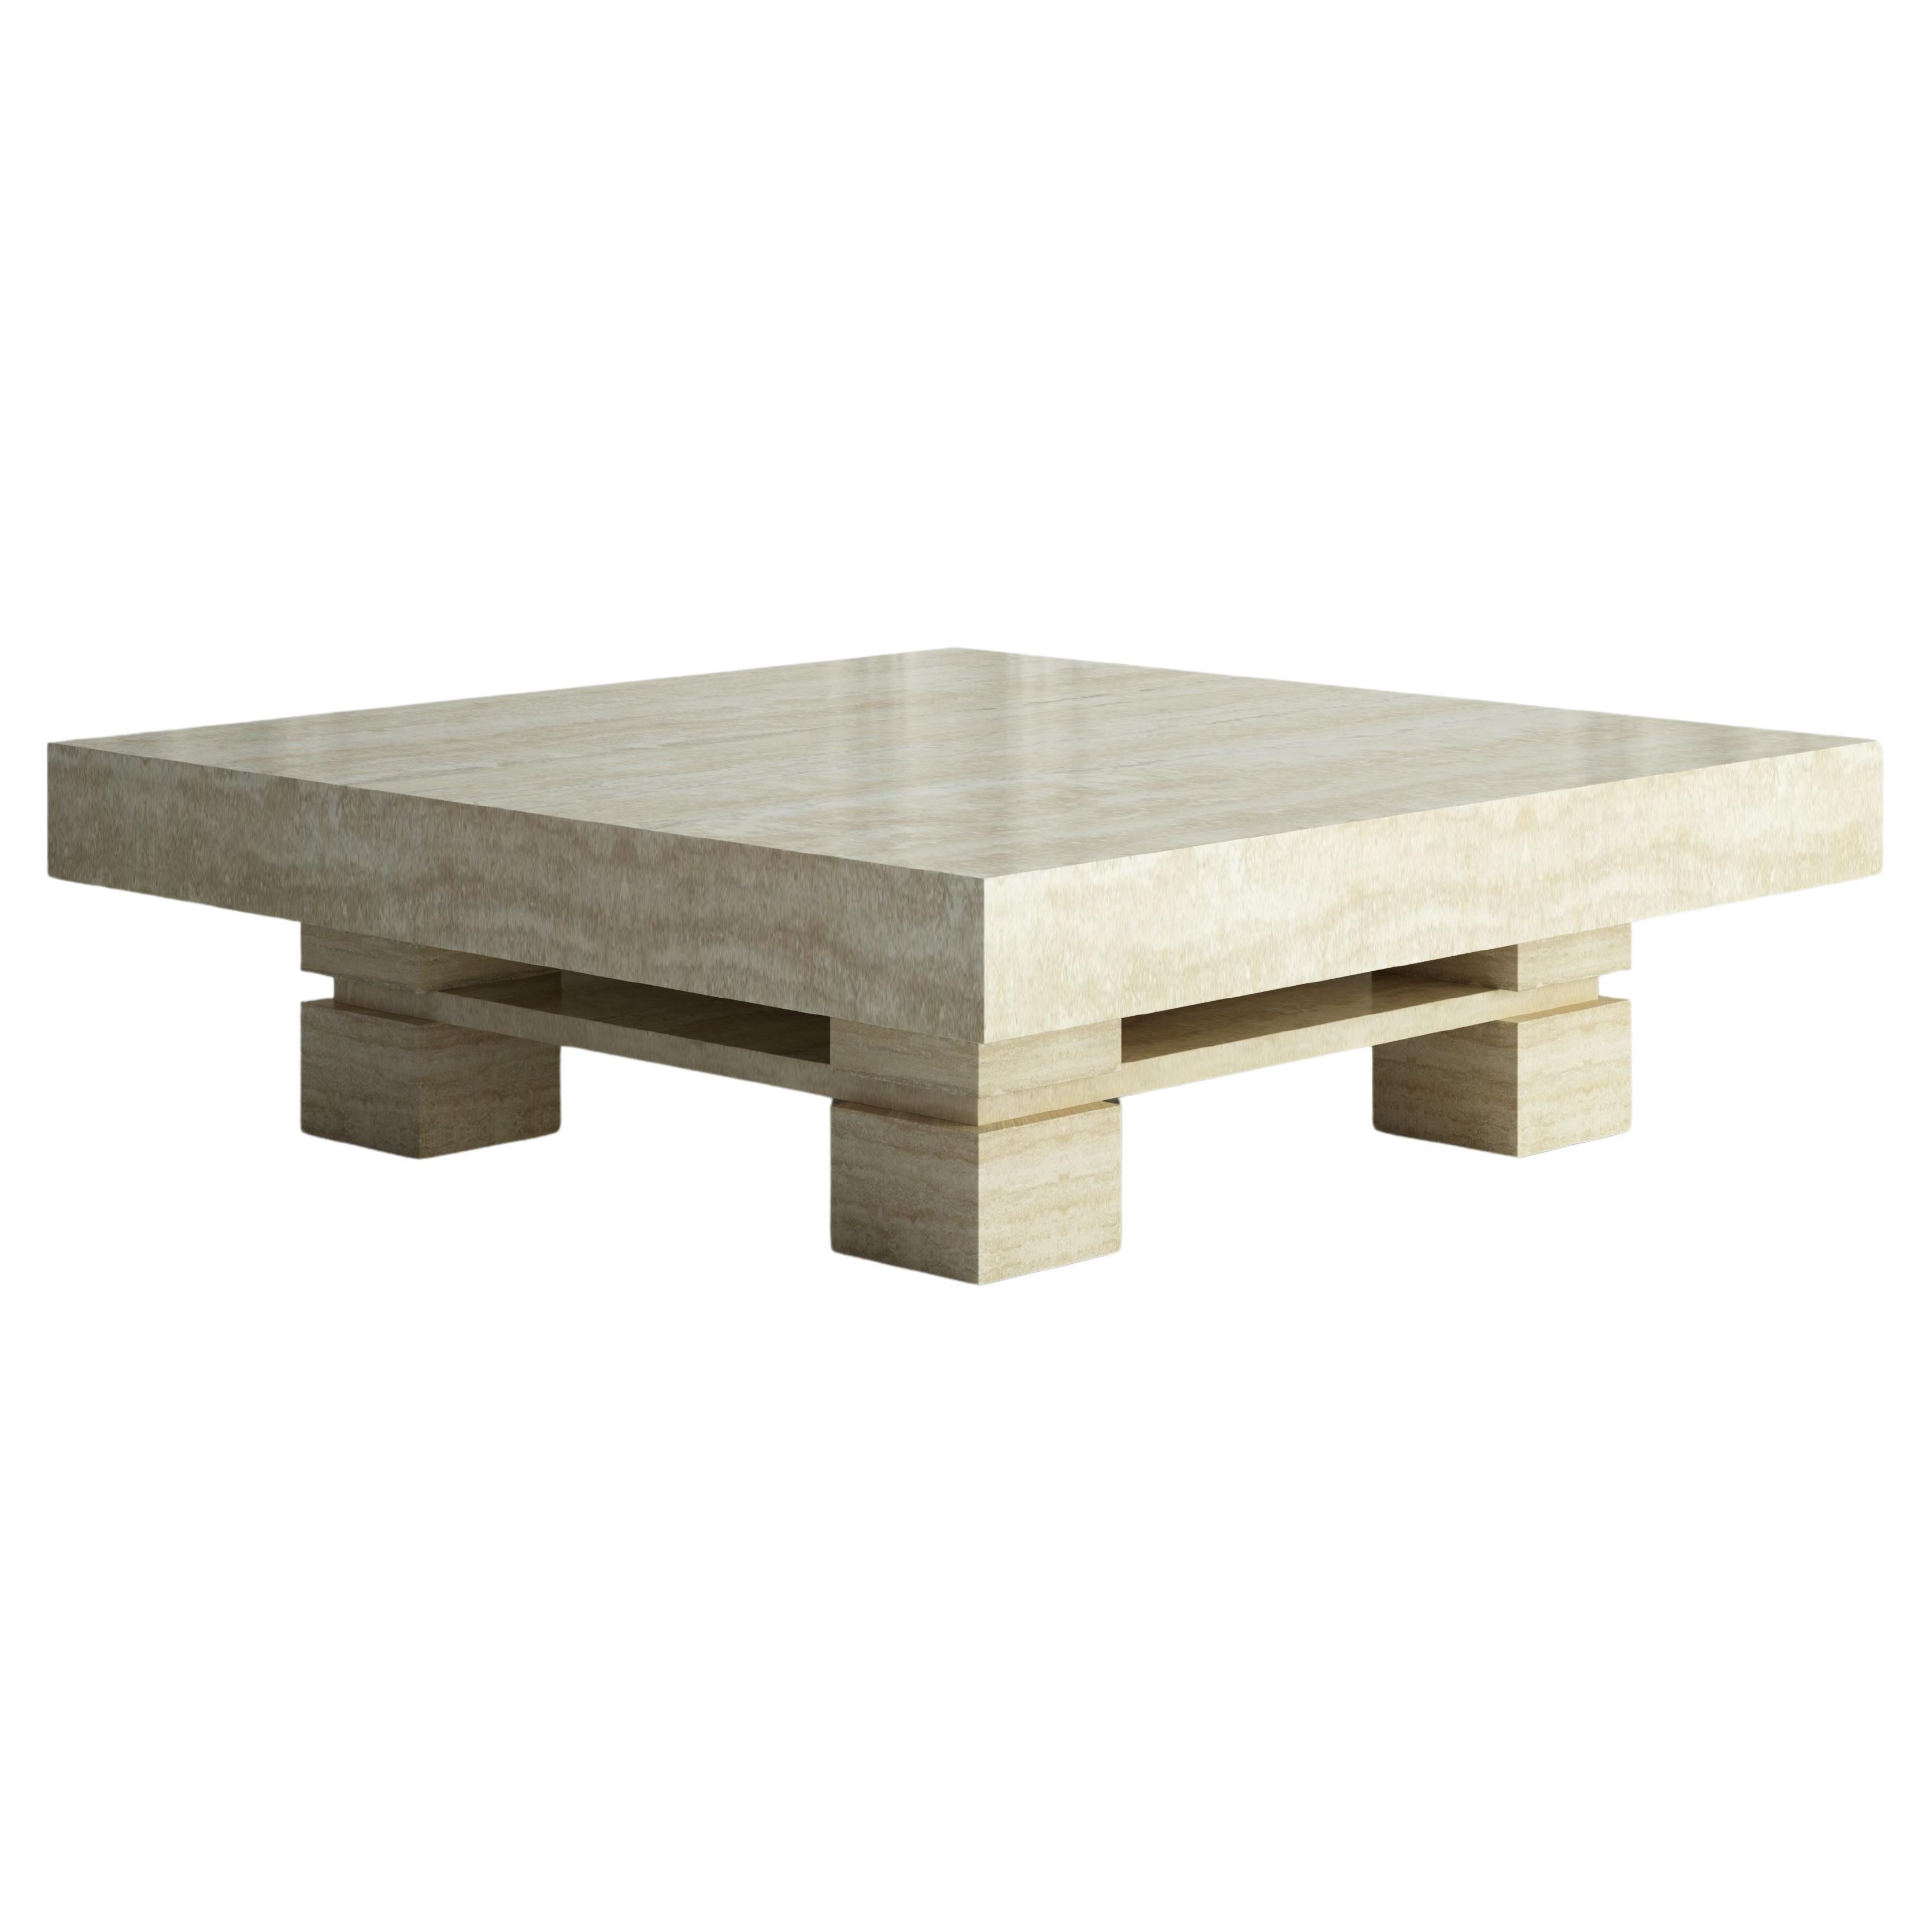 The Elodie: A Modern Stone Coffee Table with a Square Top and Four Square Bases For Sale